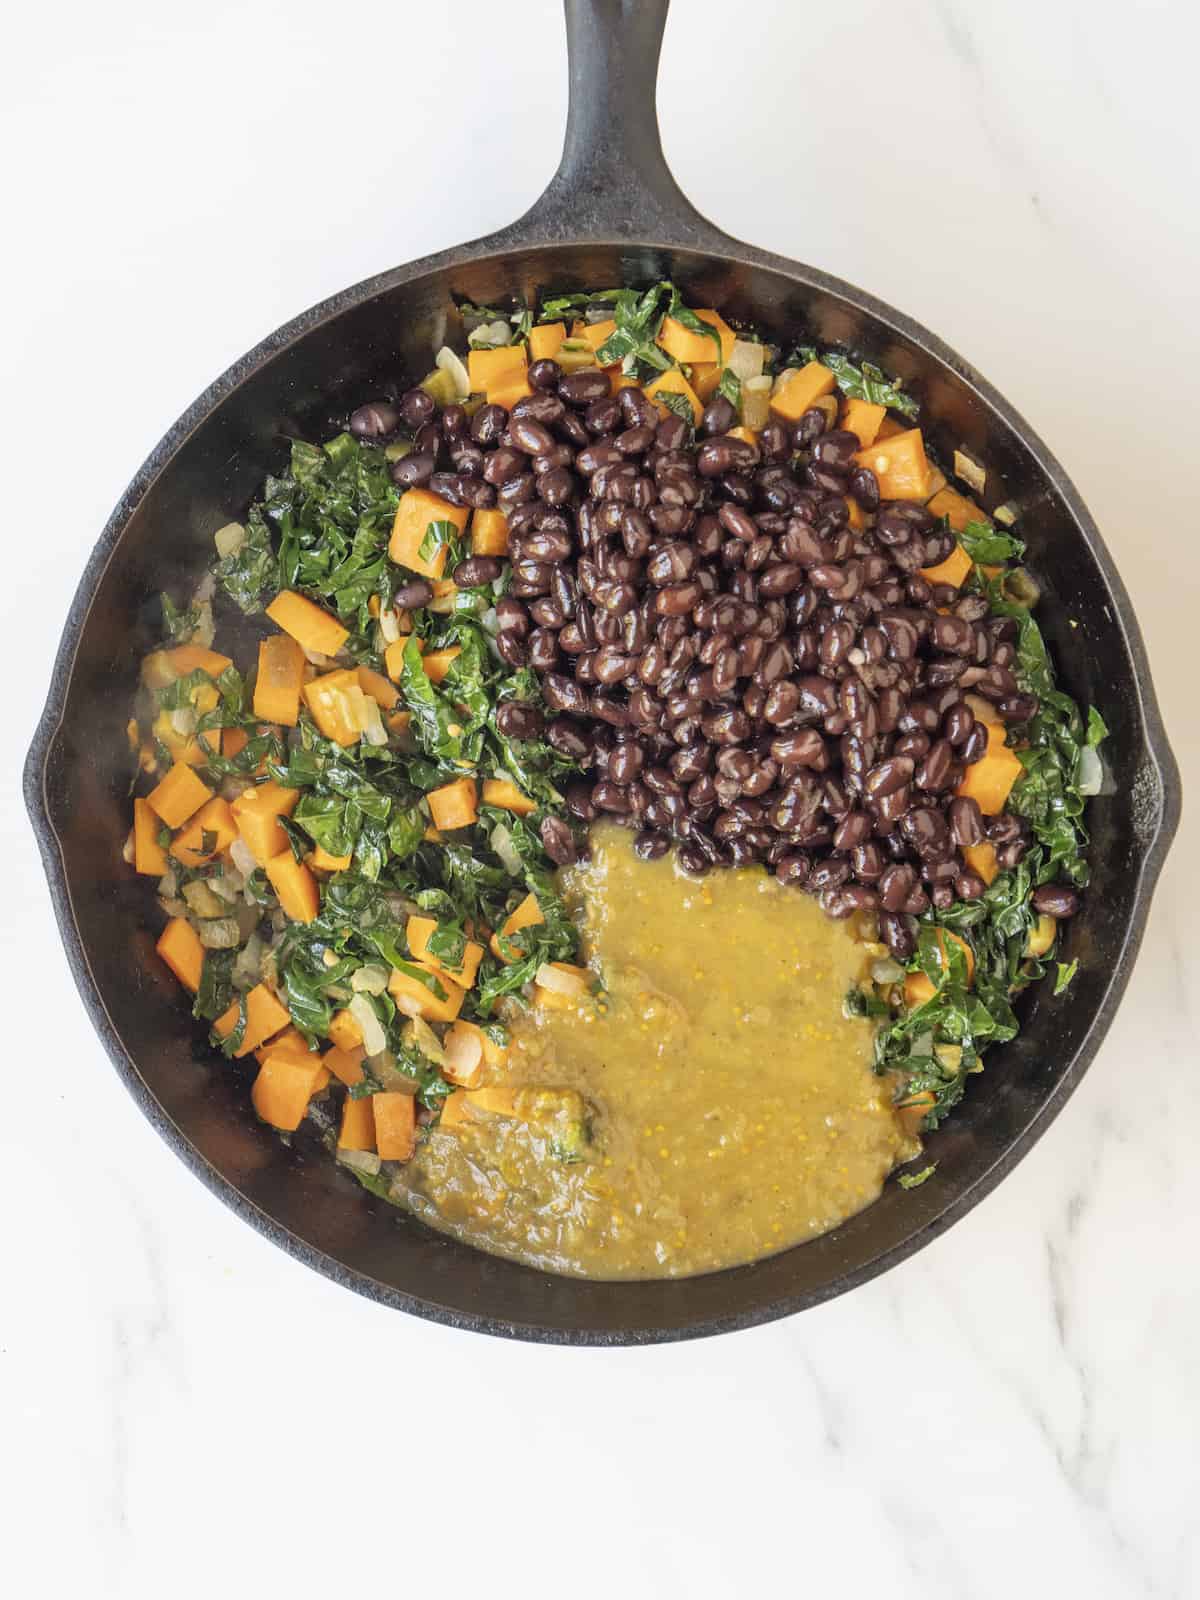 A skillet with cooked vegetables (kale, onions, sweet potatoes) topped with black beans and enchilada sauce, all being cooked together.